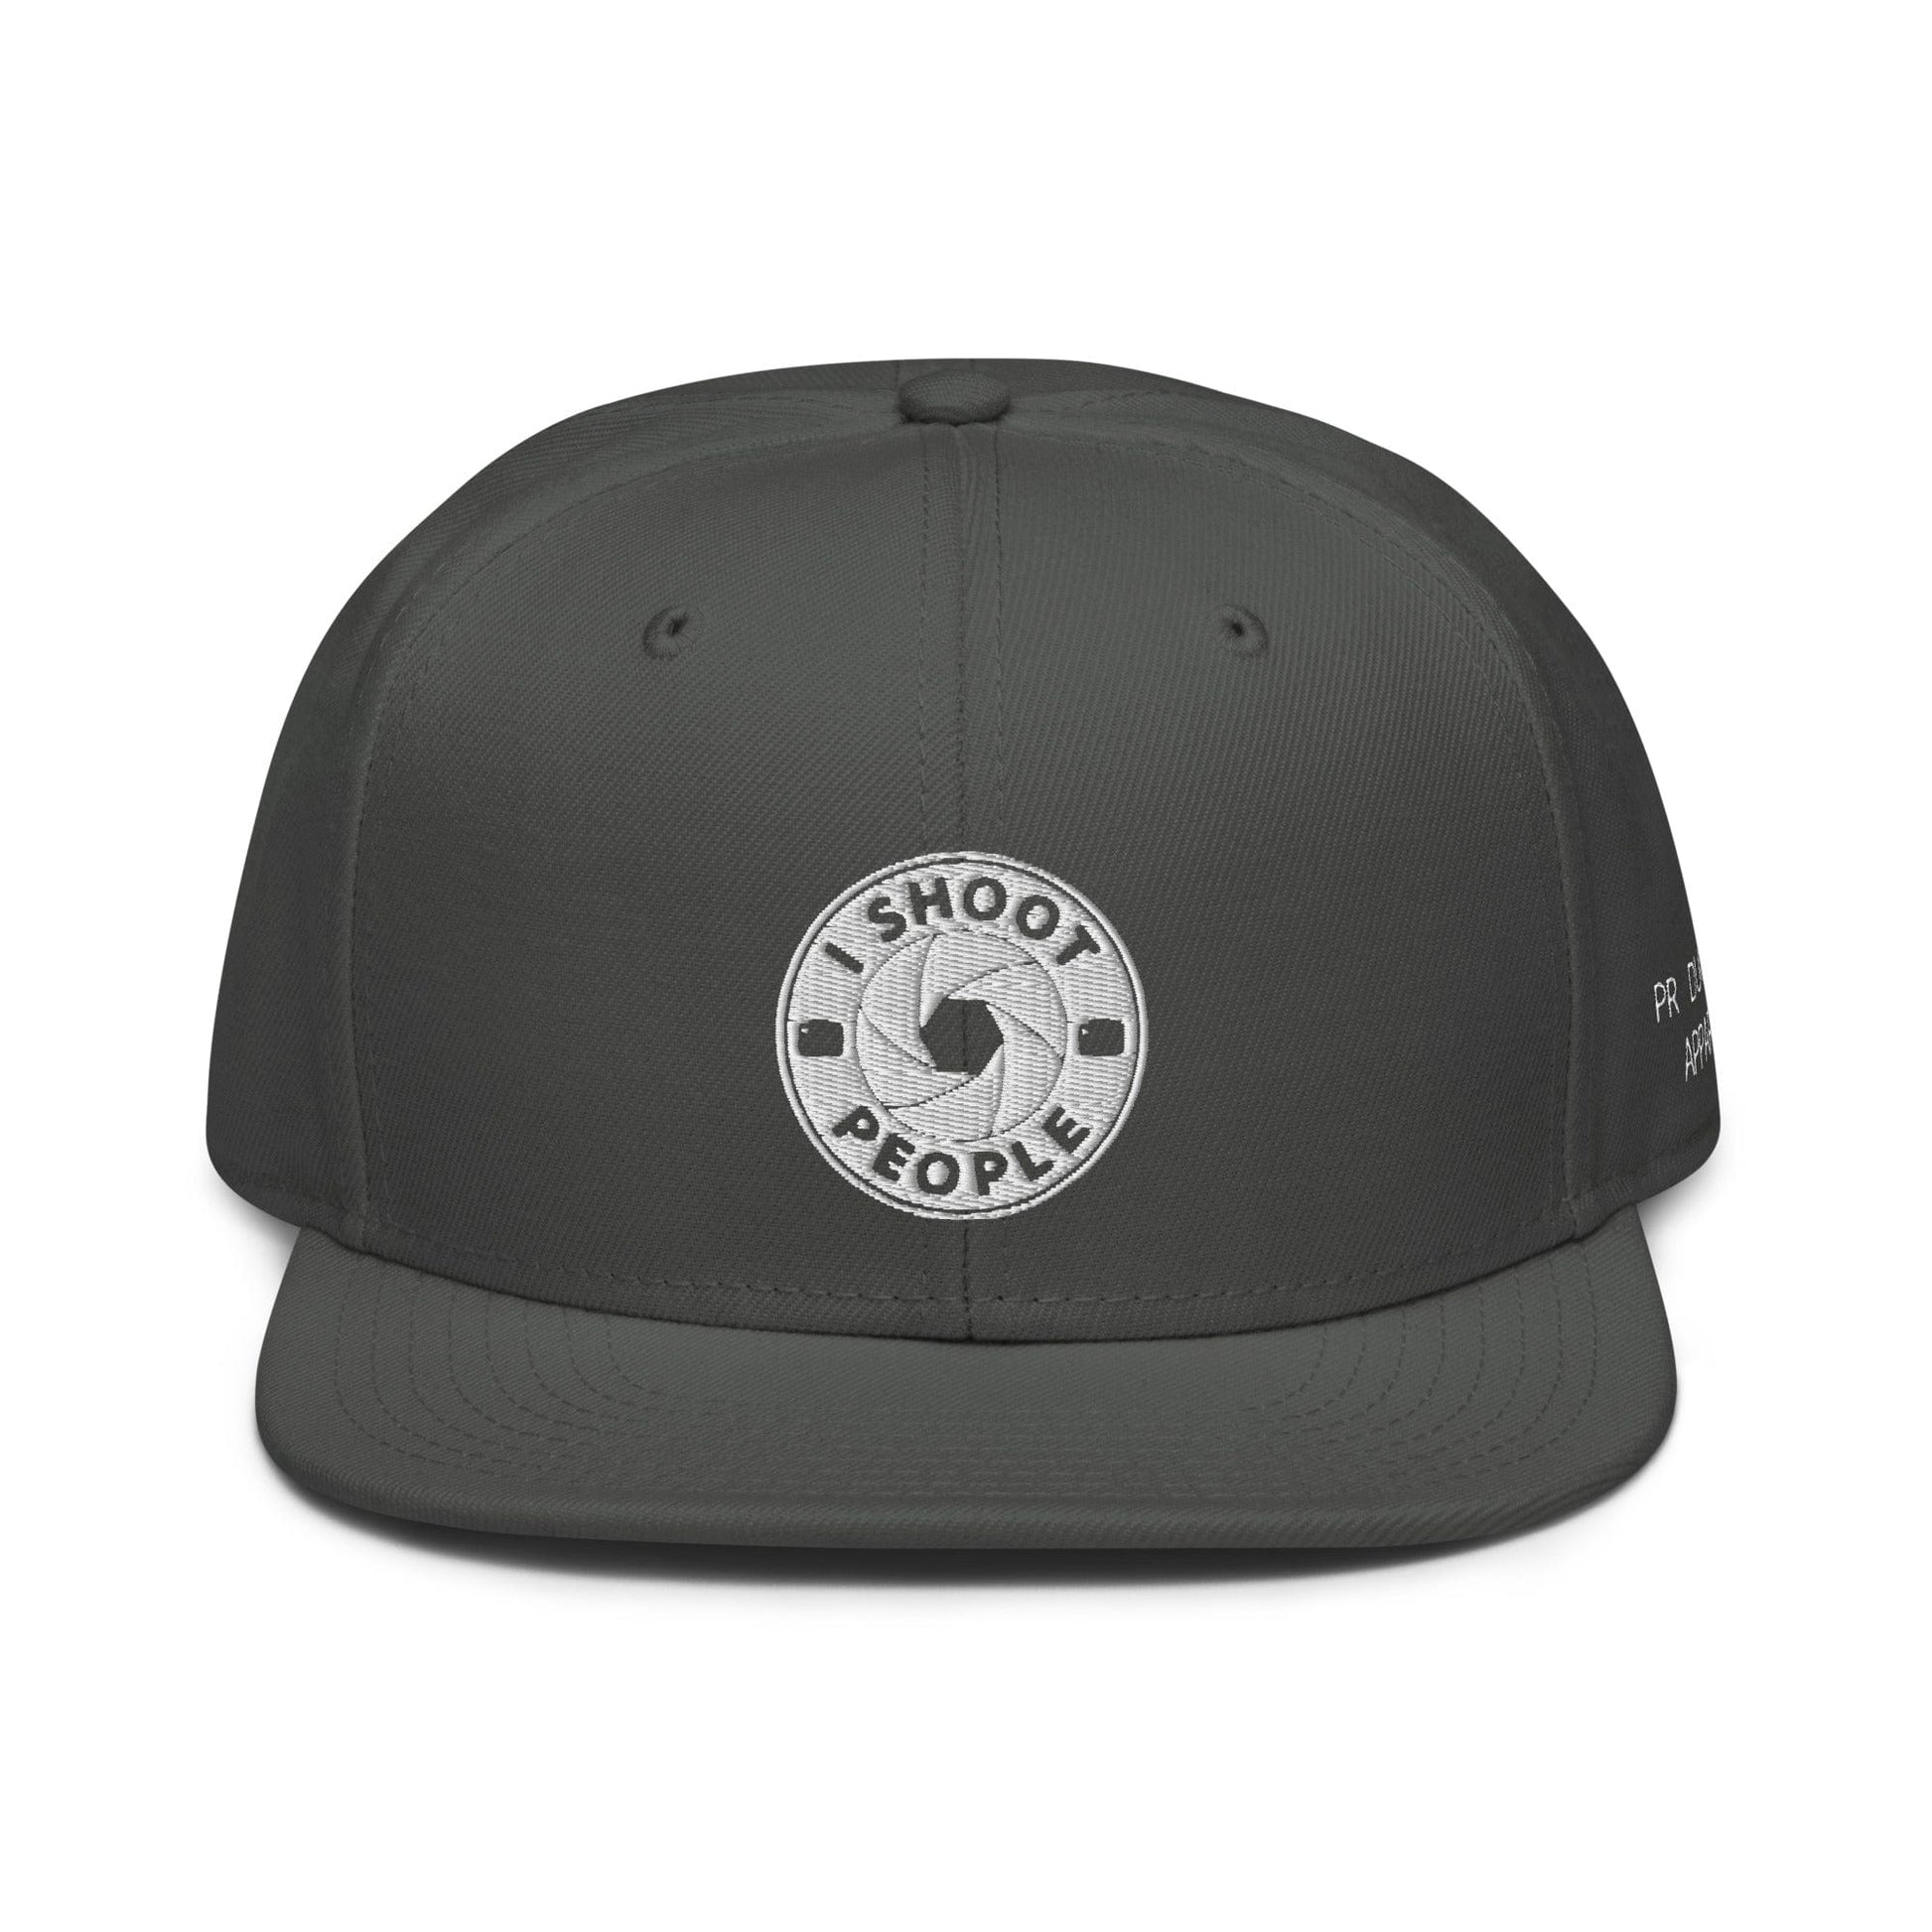 Production Apparel I Shoot People Hat Charcoal gray